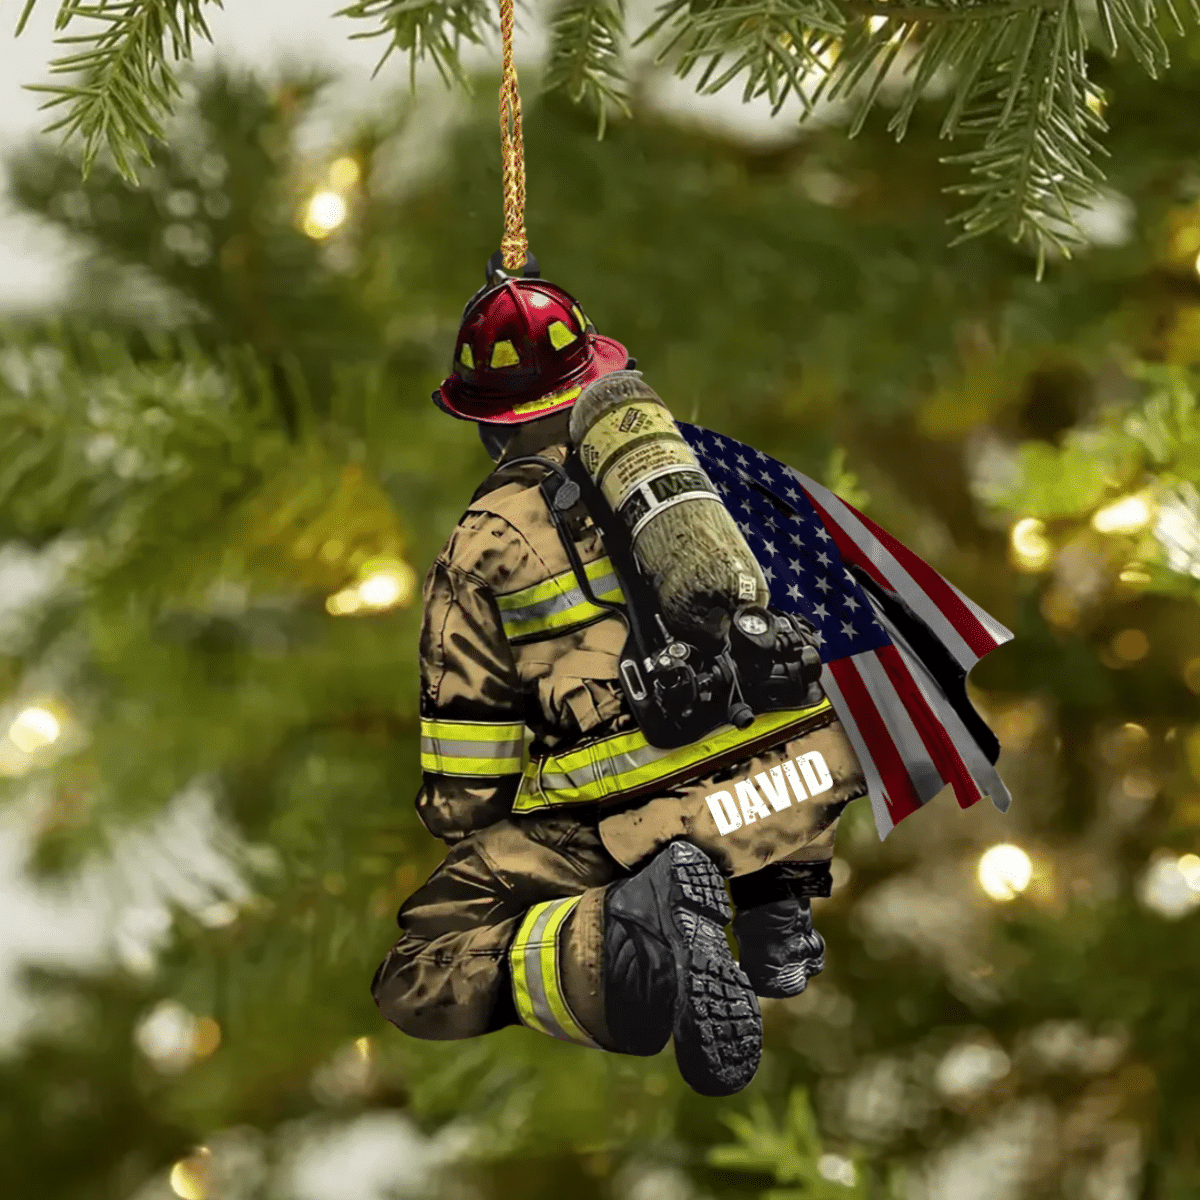 Personalized Firefighter and Fire Extinguisher Christmas Ornament for Fireman/ US Flag Firefighter Ornament